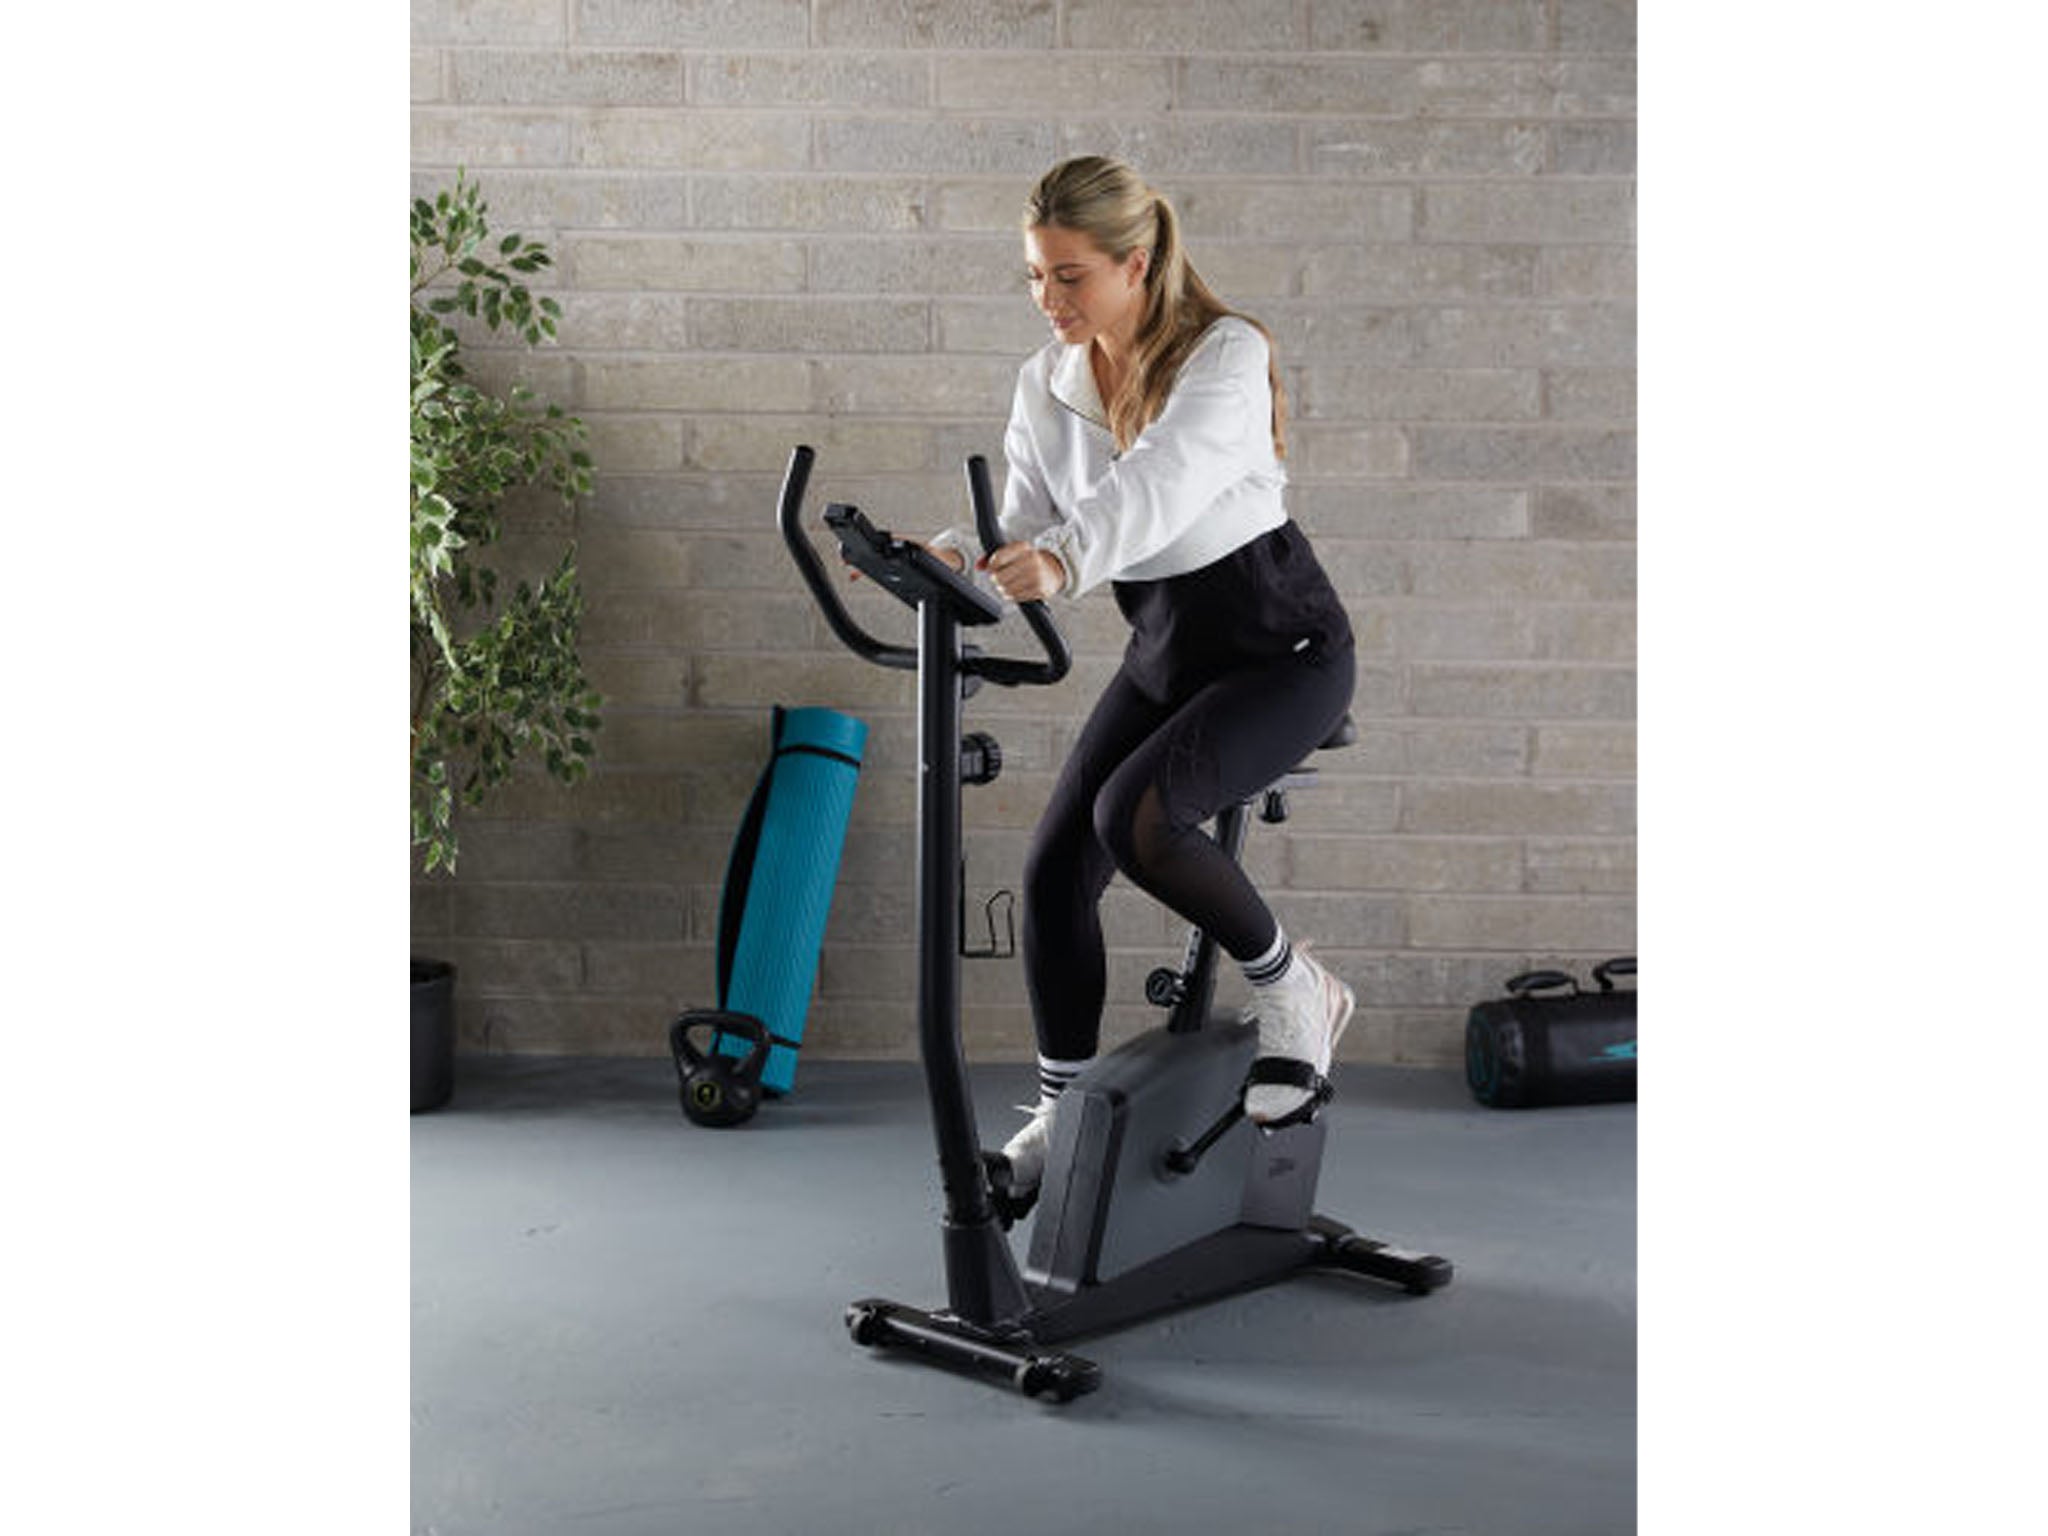 Aldi's exercise bike is back for 2022 to help you smash your fitness goals